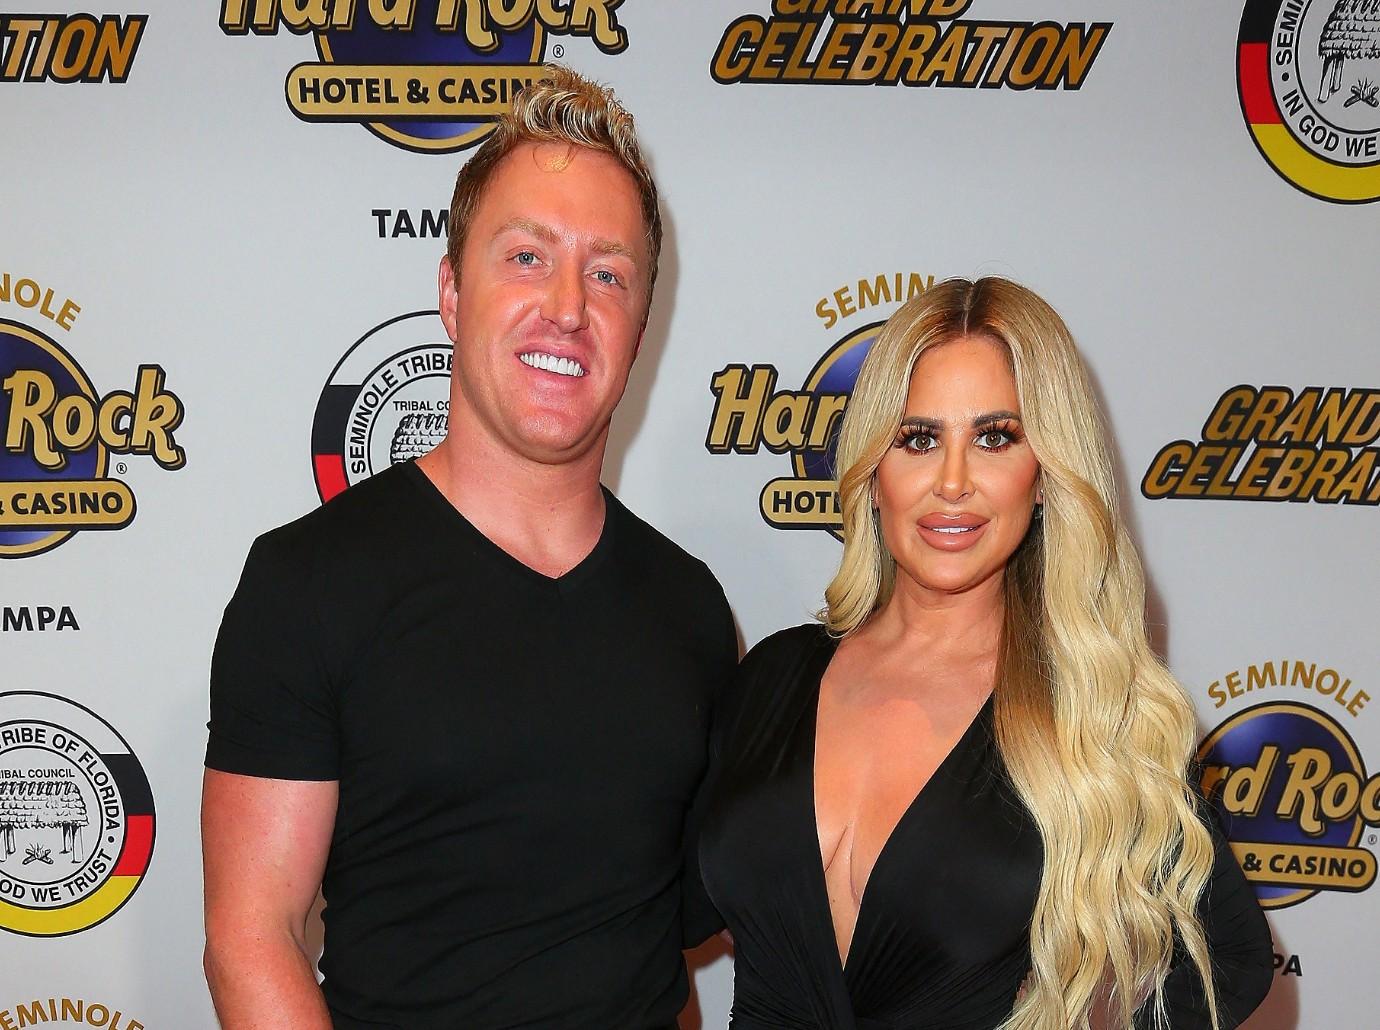 Kroy Biermann Called Cops On Ex Kim Zolciak For Not Leaving Bathroom picture pic